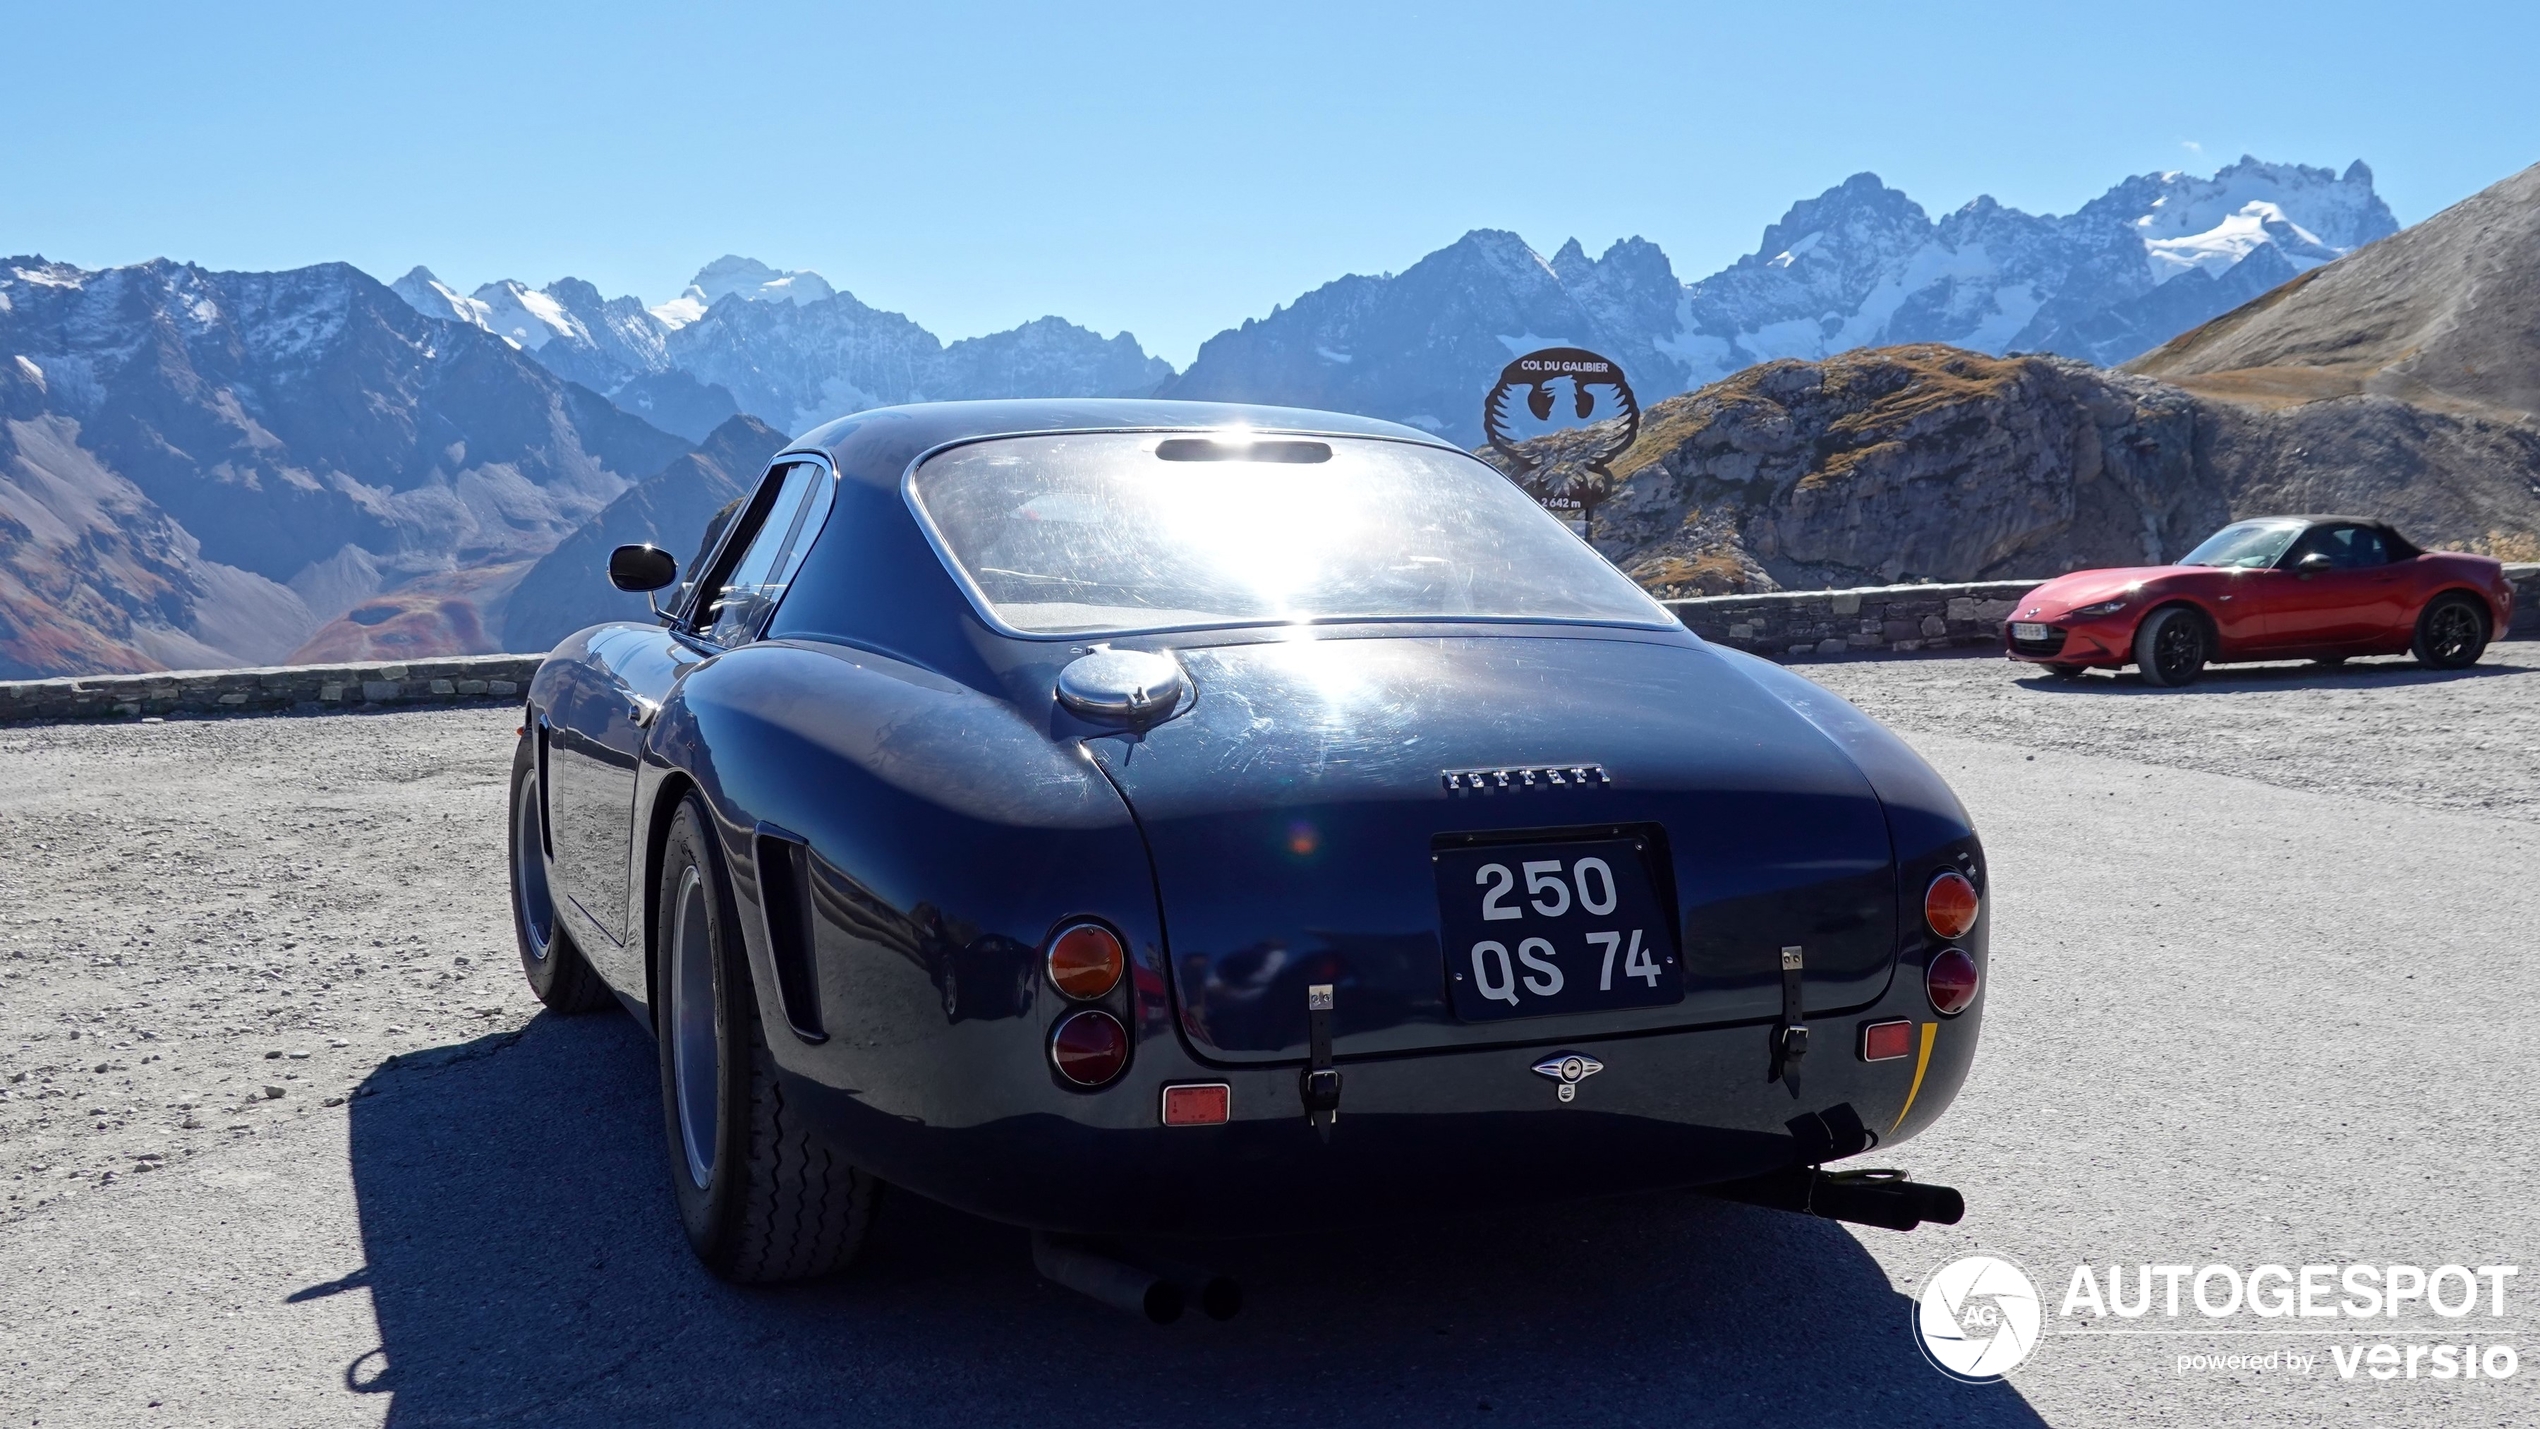 Here you can see the even rarer version of the 250 GT SWB Berlinetta.